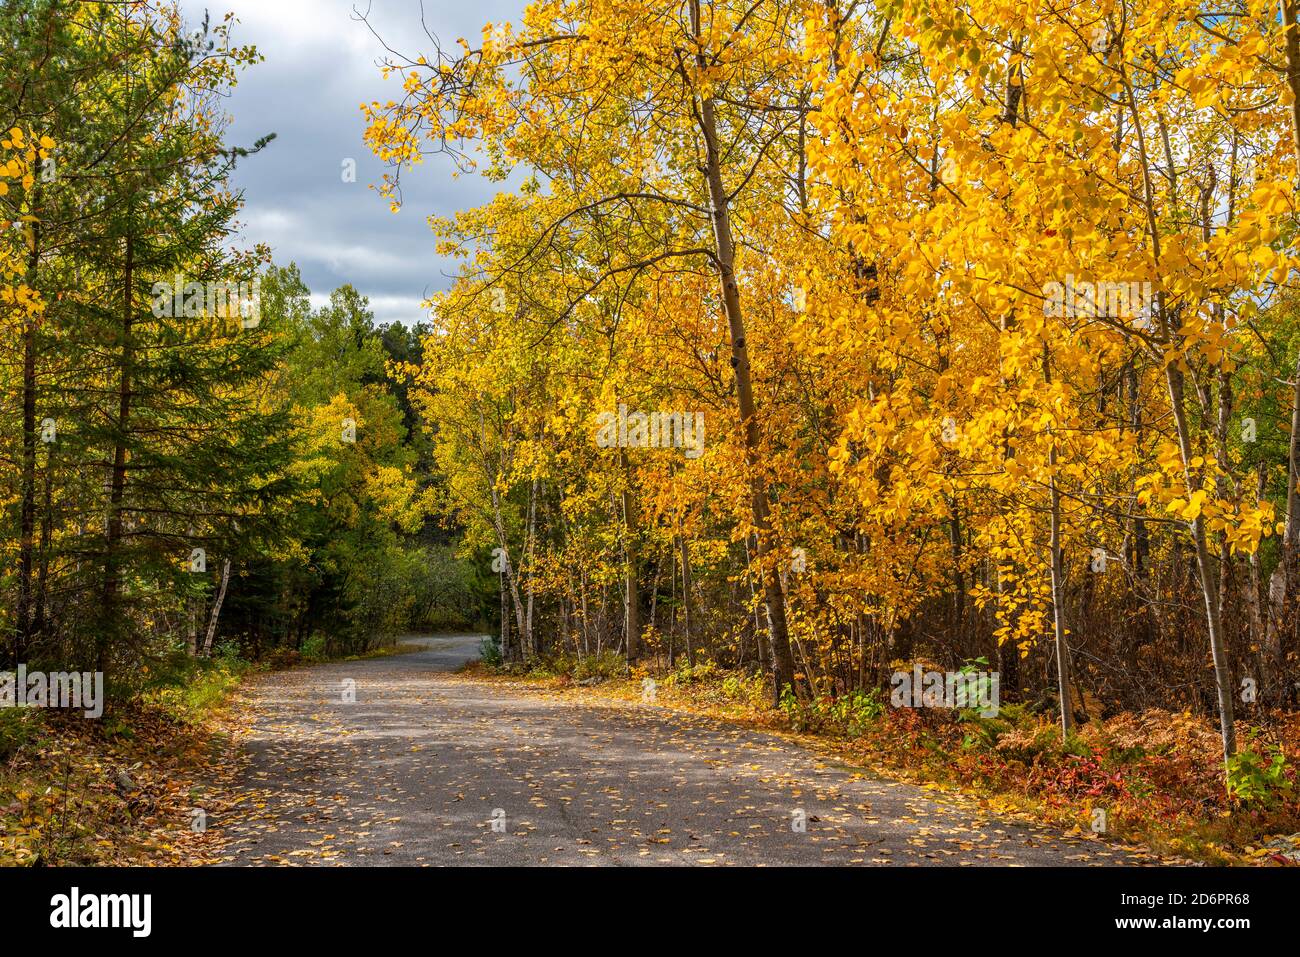 Fall foliage color in the trees at Rushing River Provincial Park, Ontario, Canada. Stock Photo